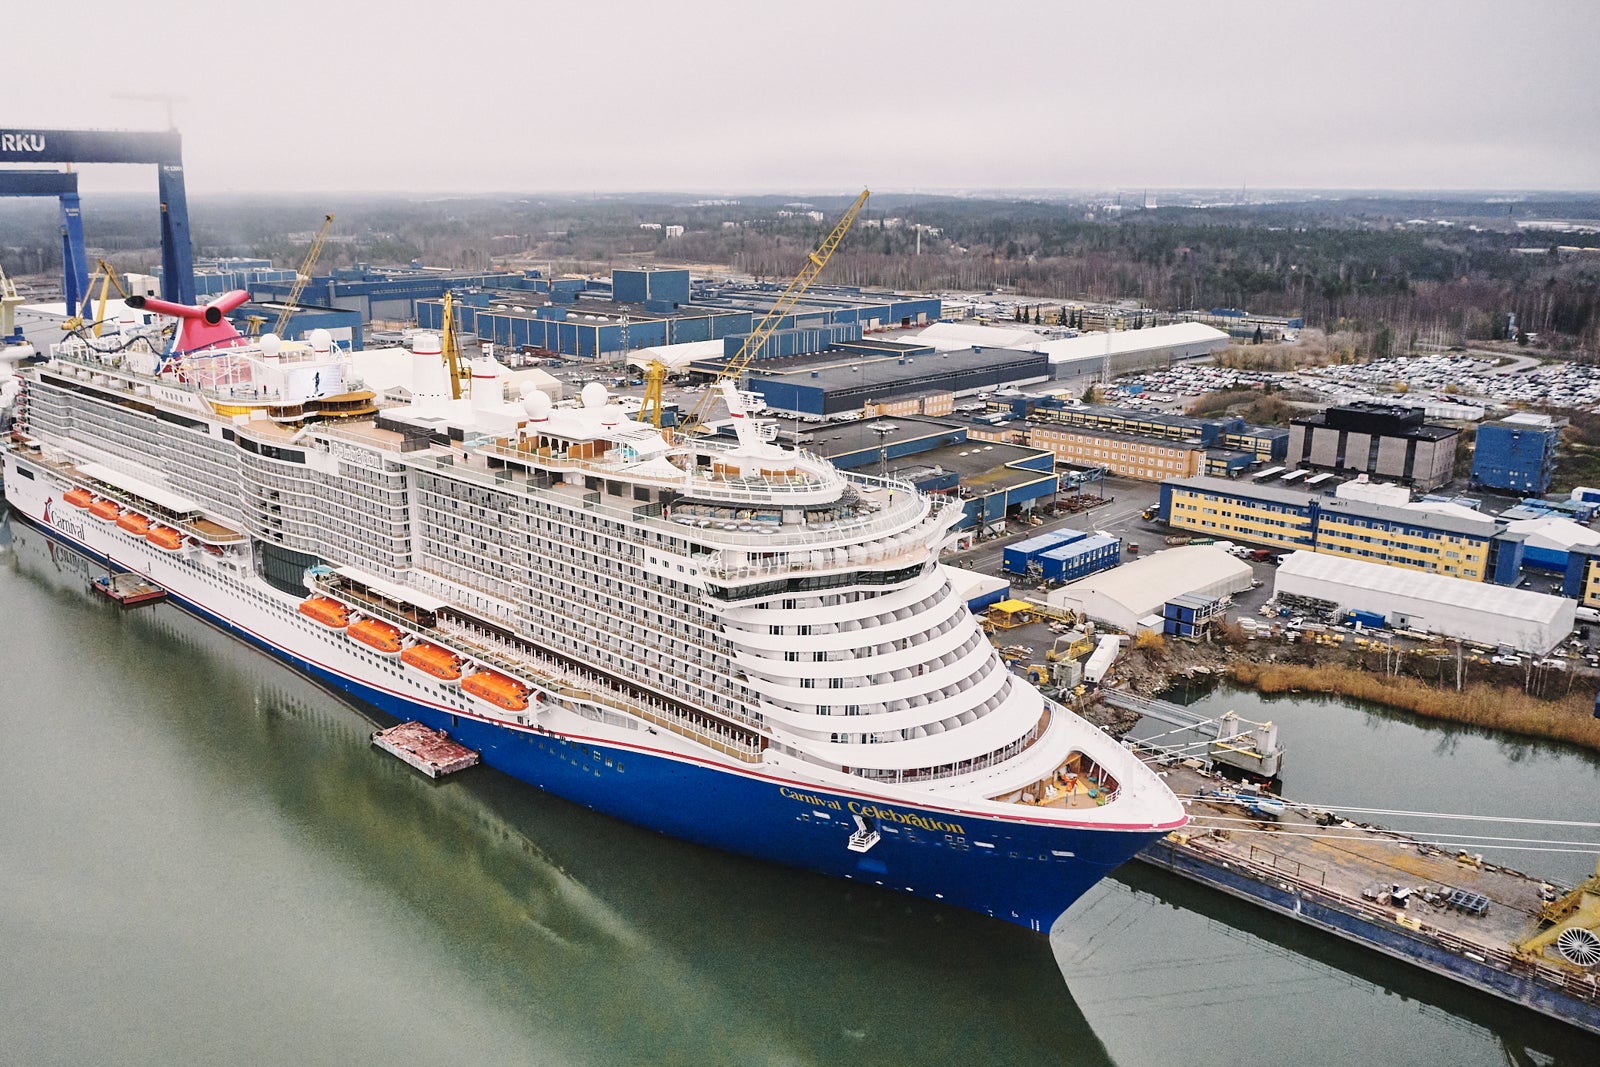 Let the 'Celebration' begin: Cruise giant Carnival's biggest ship ever debuts th..